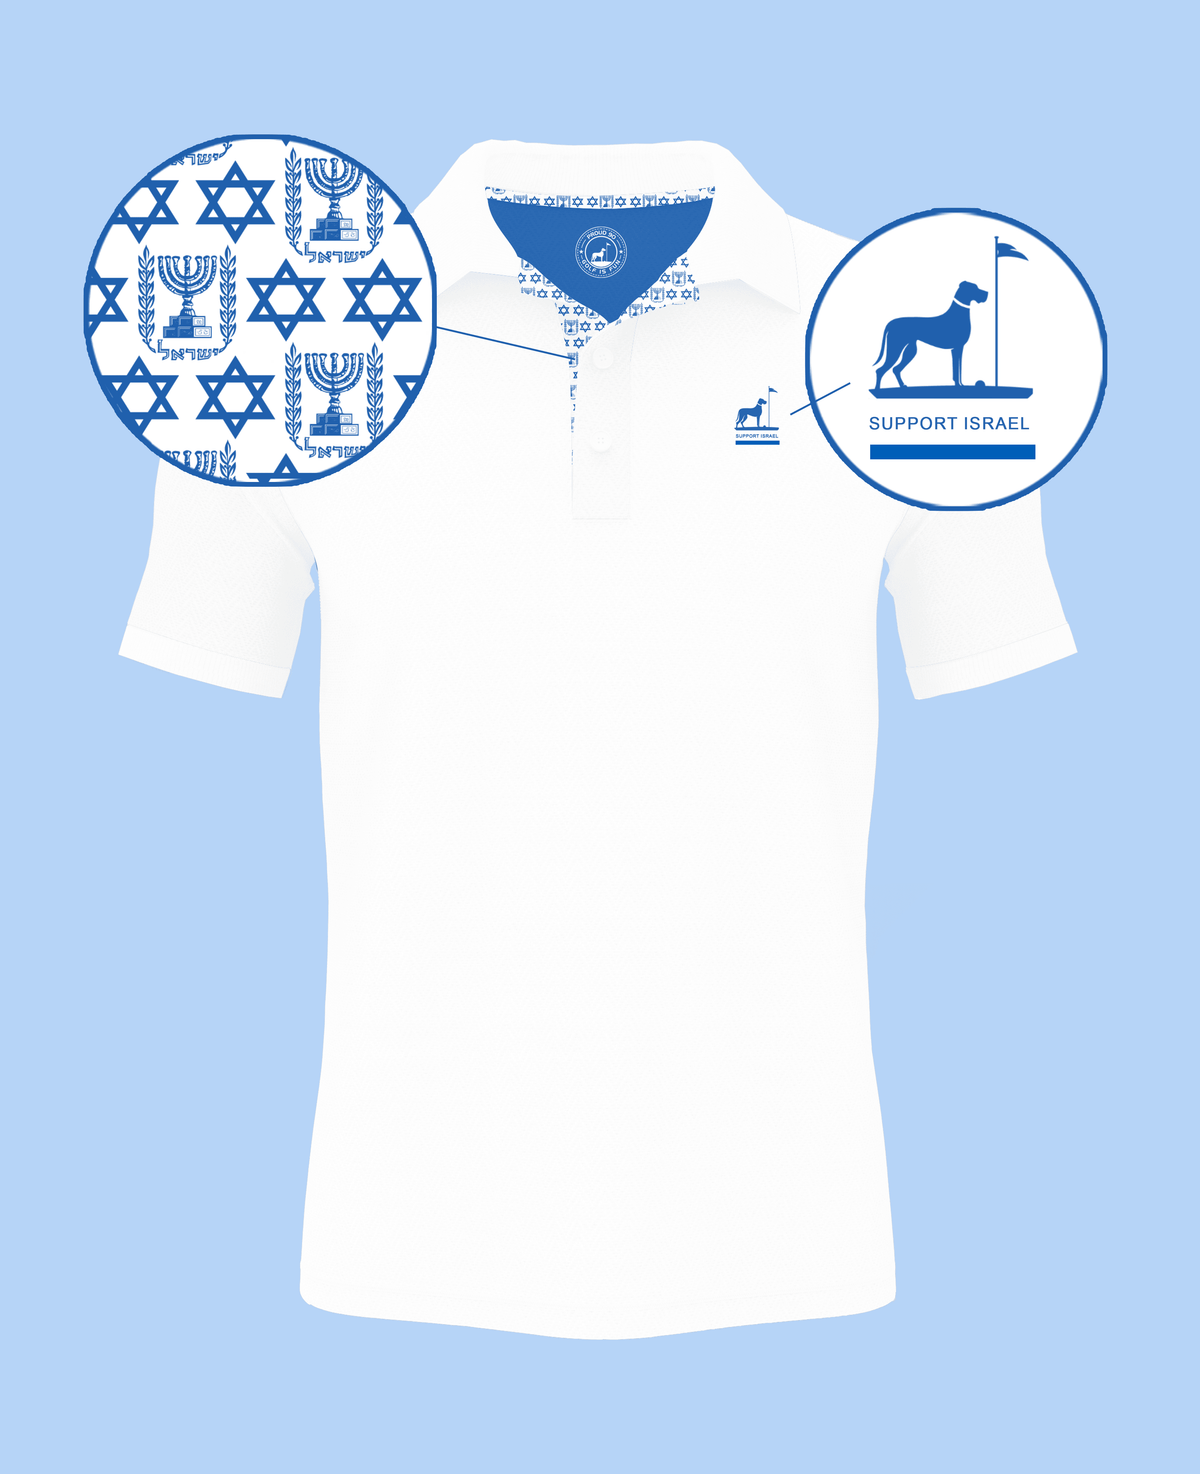 Taking Action for Israel: Join us in making a difference Men&#39;s Forever Collection Proud 90 